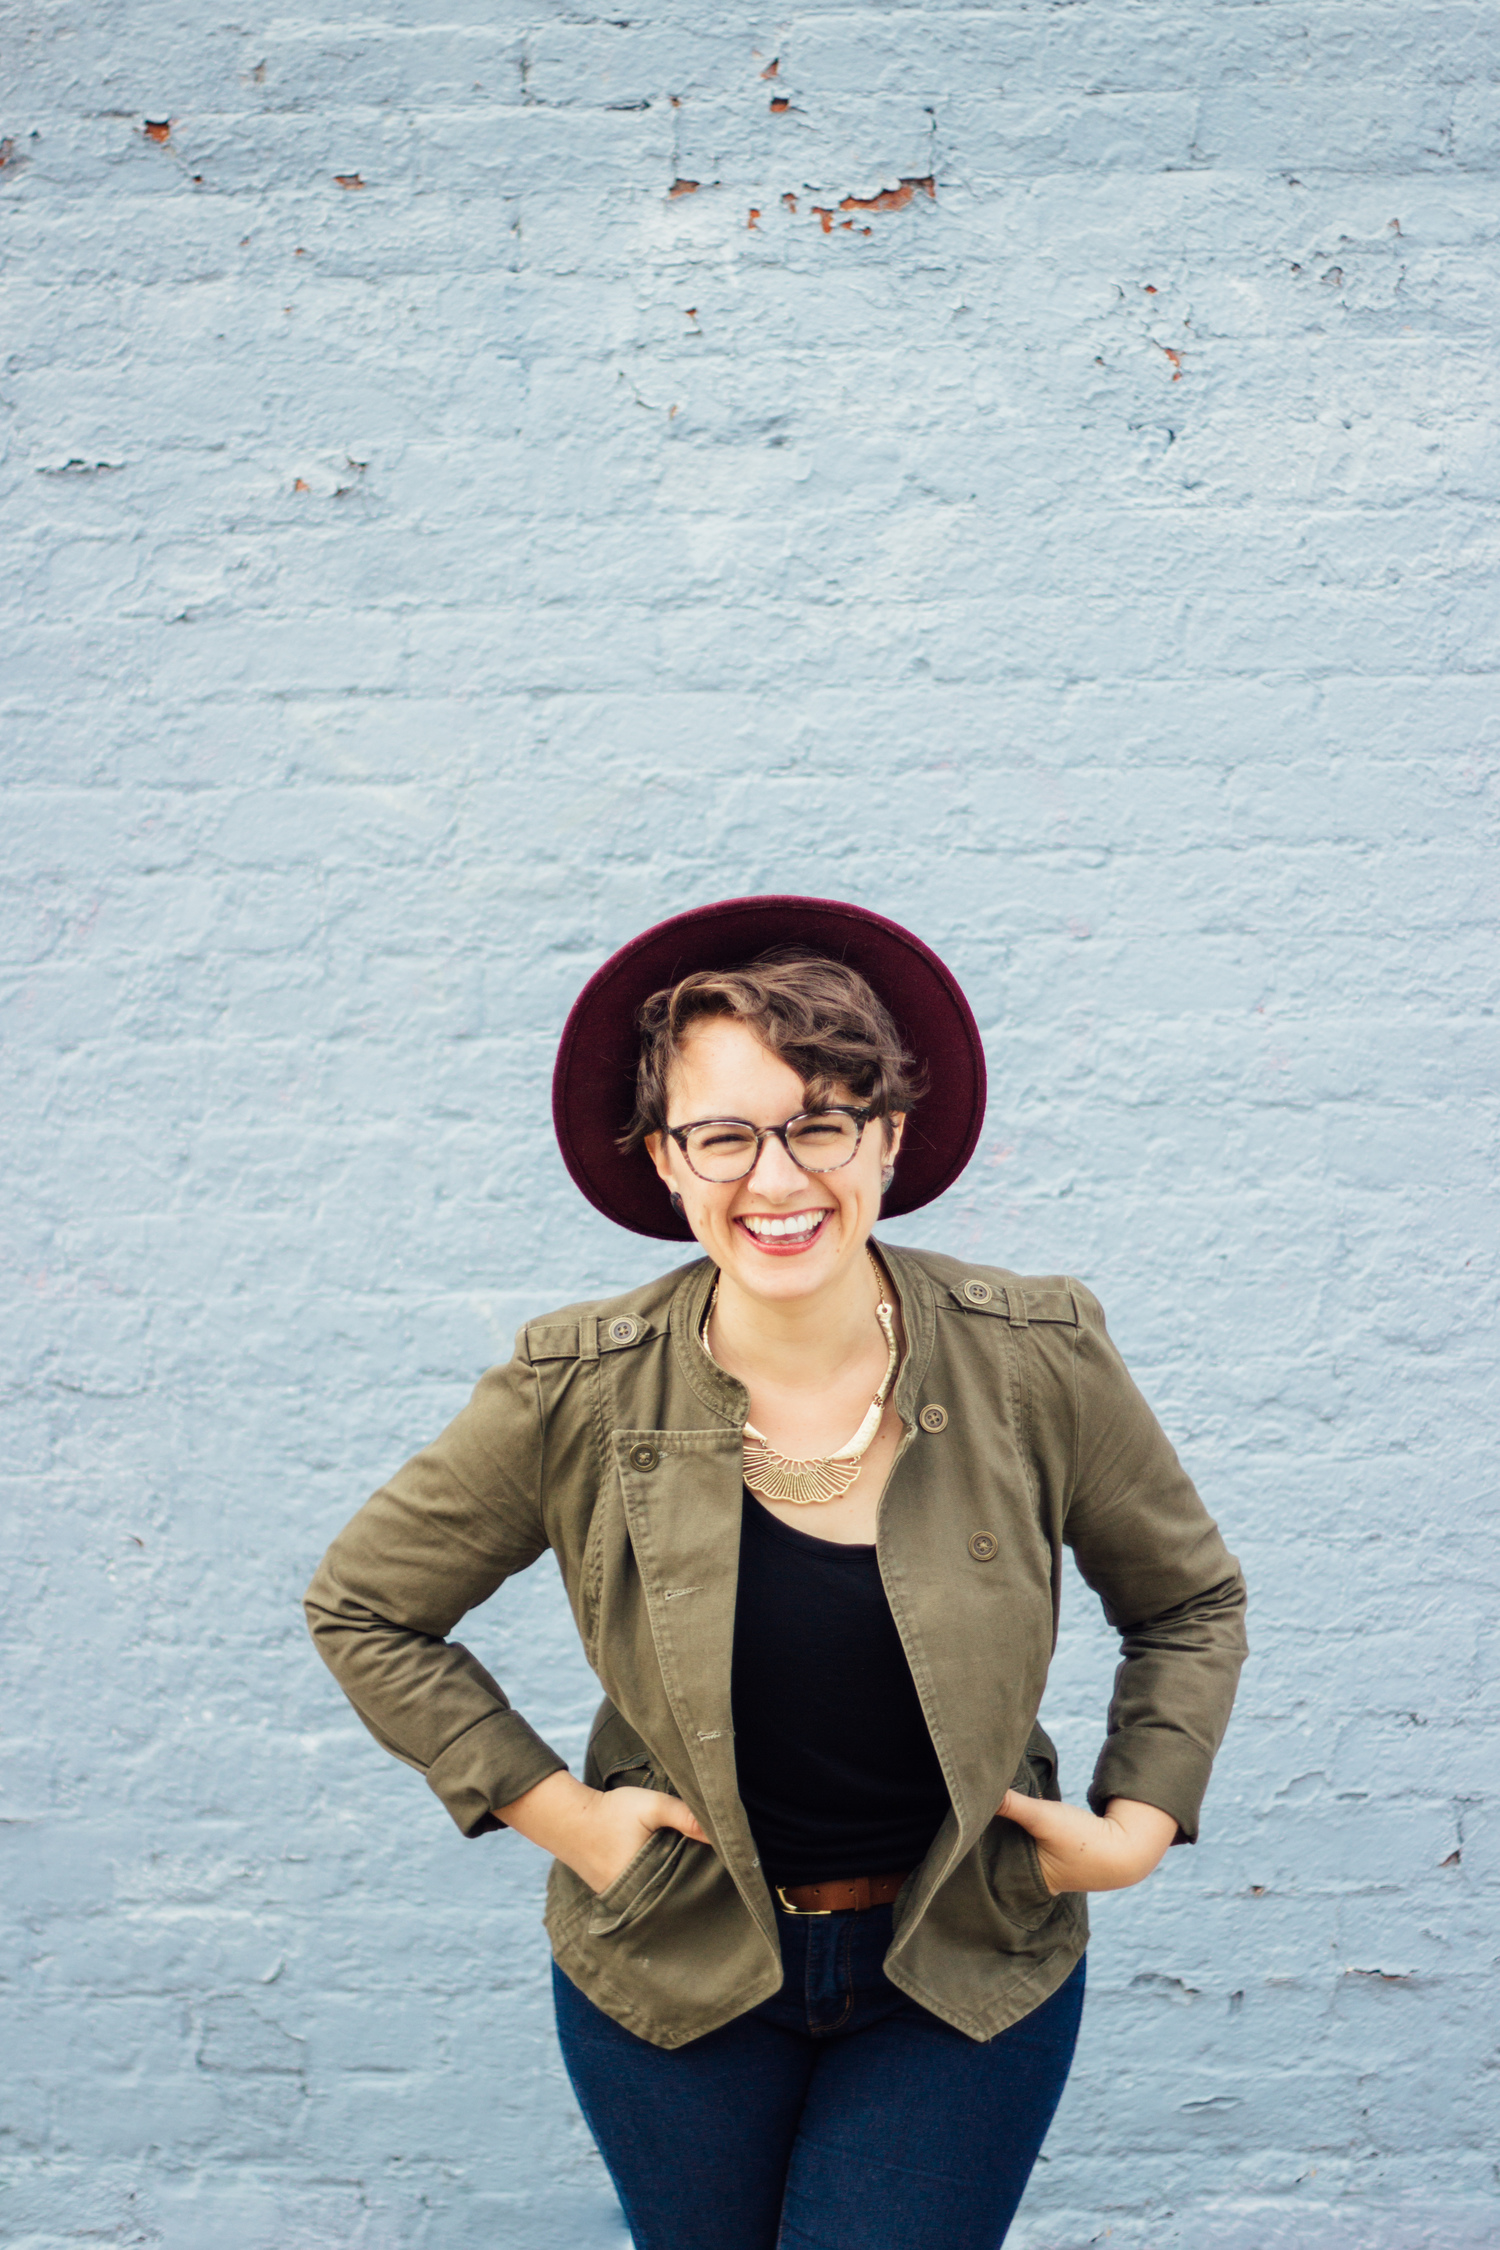   Hey! I’m Emily Lewin, Founder of the Bright Ideas Collective  